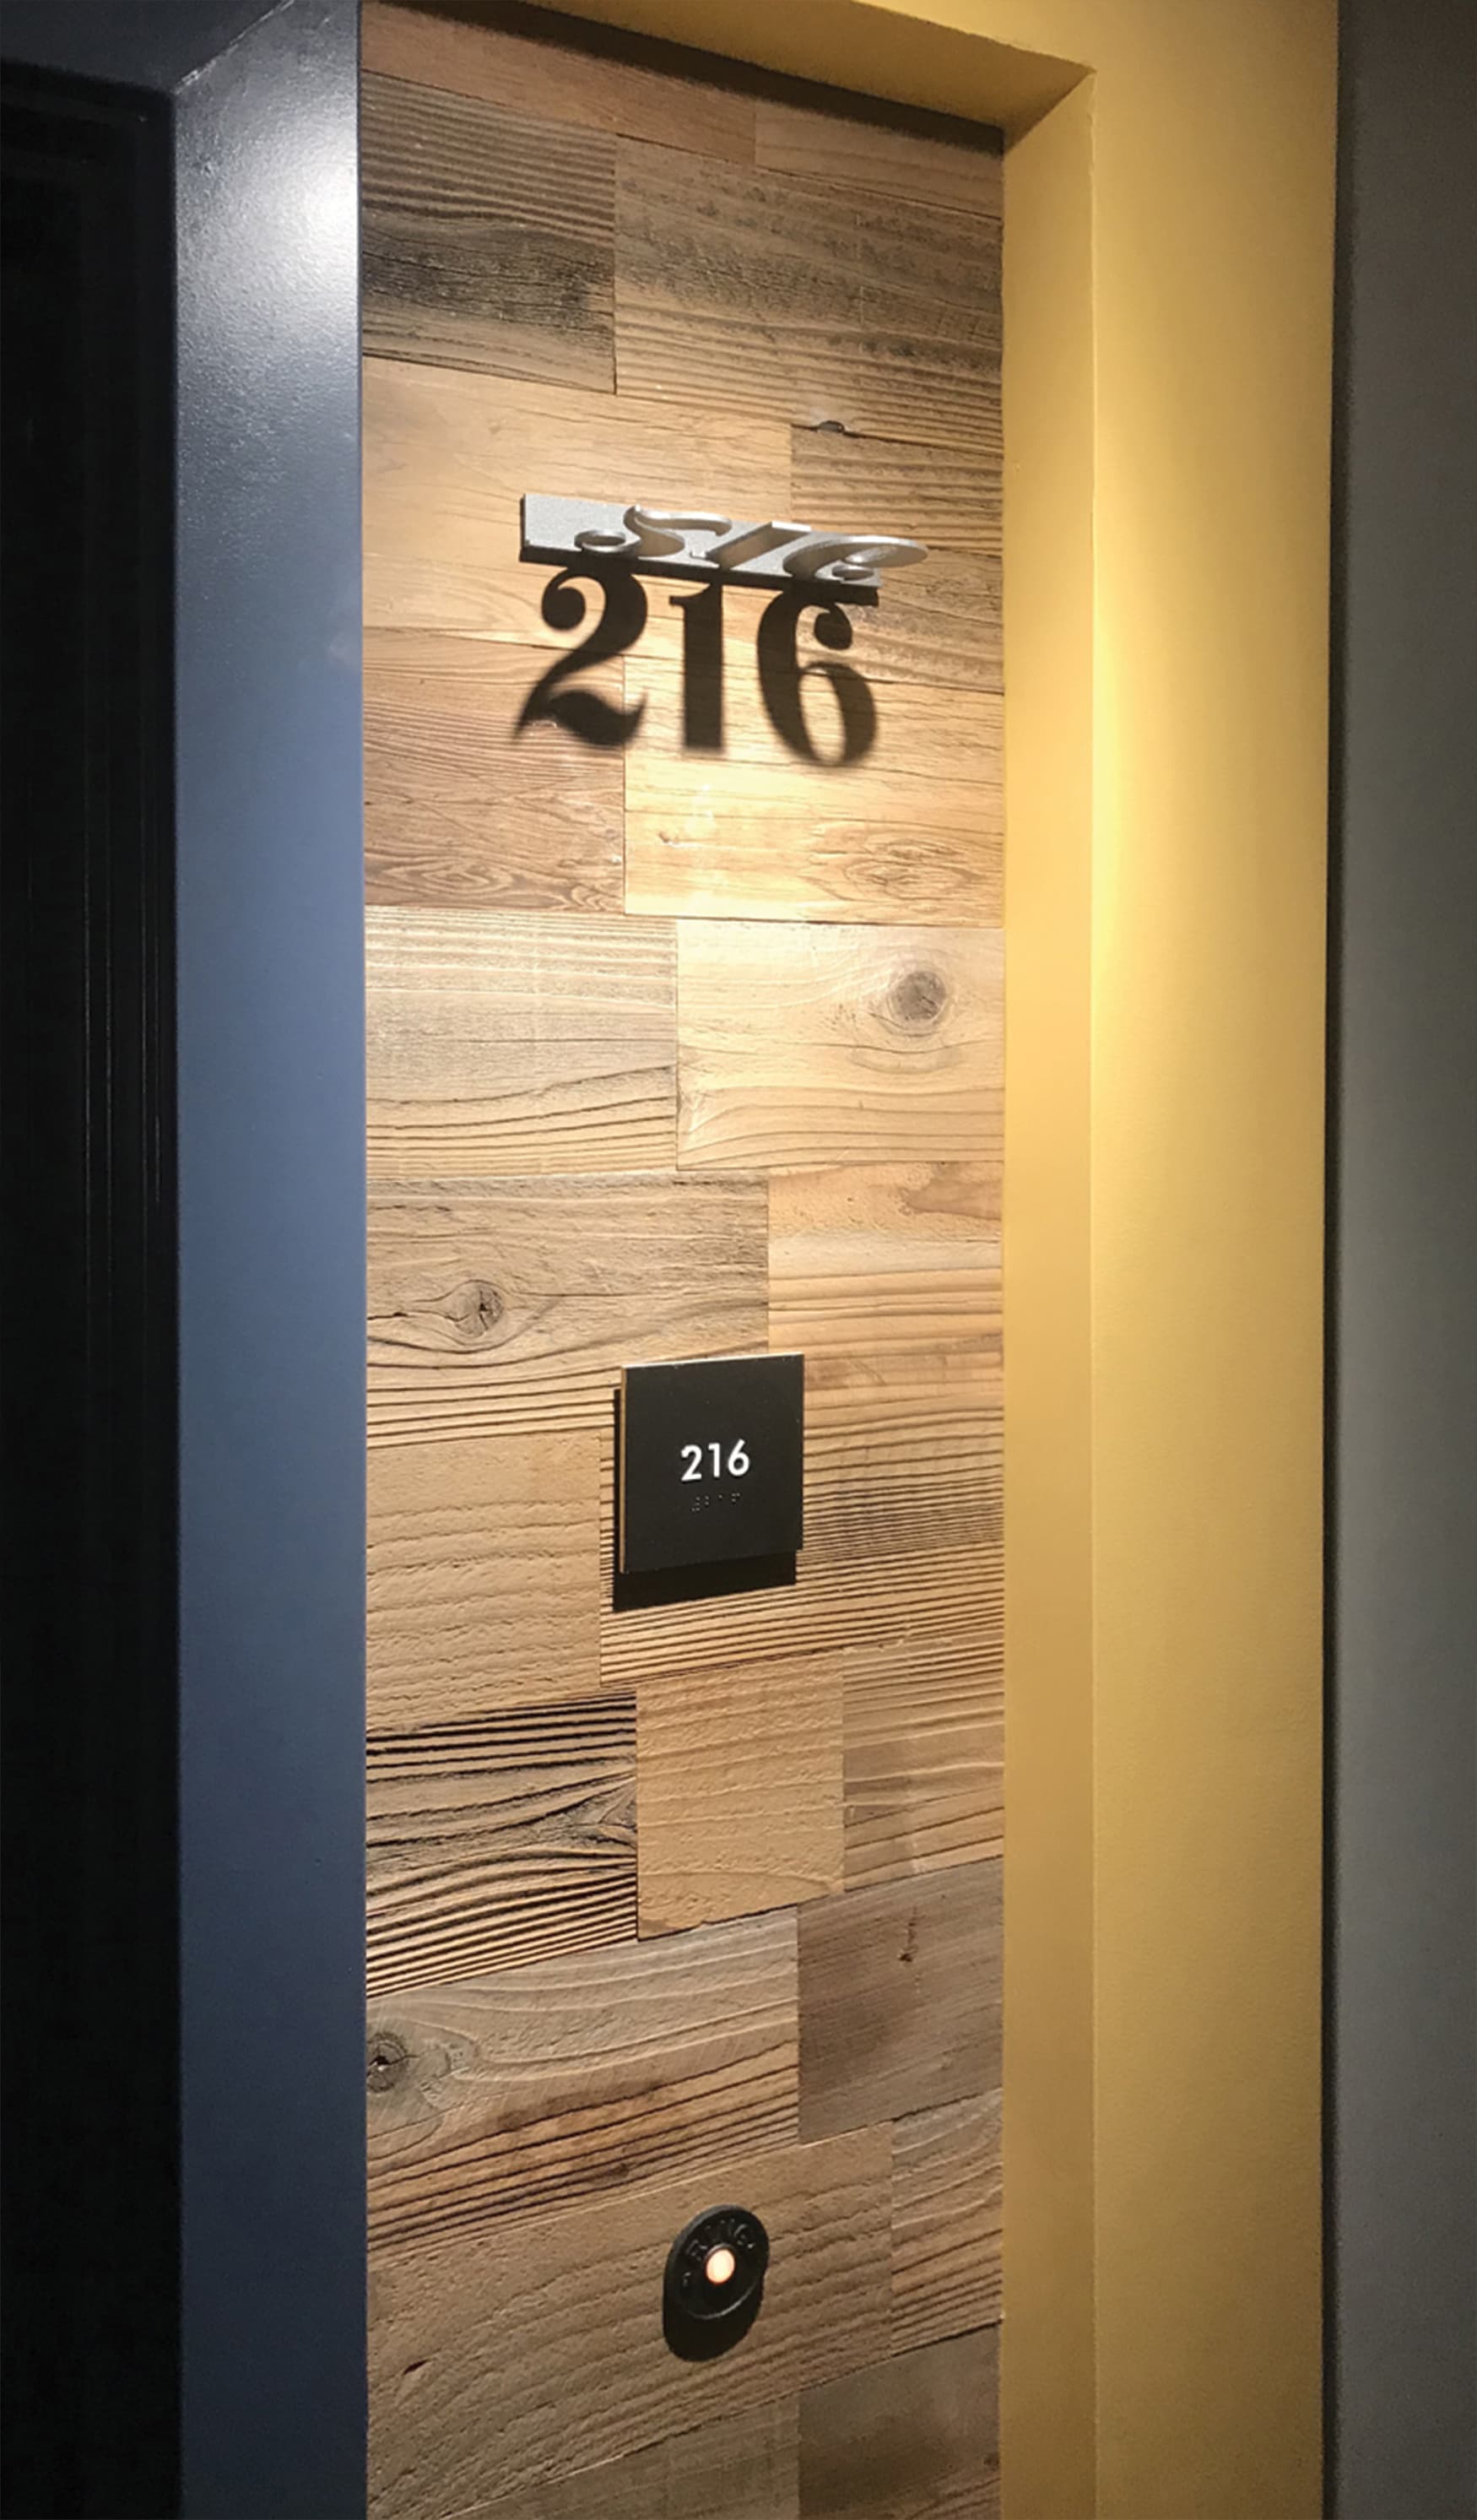 The Martin, San Francisco, Multi-Family Residential and Hospitality Room-Identity Signage